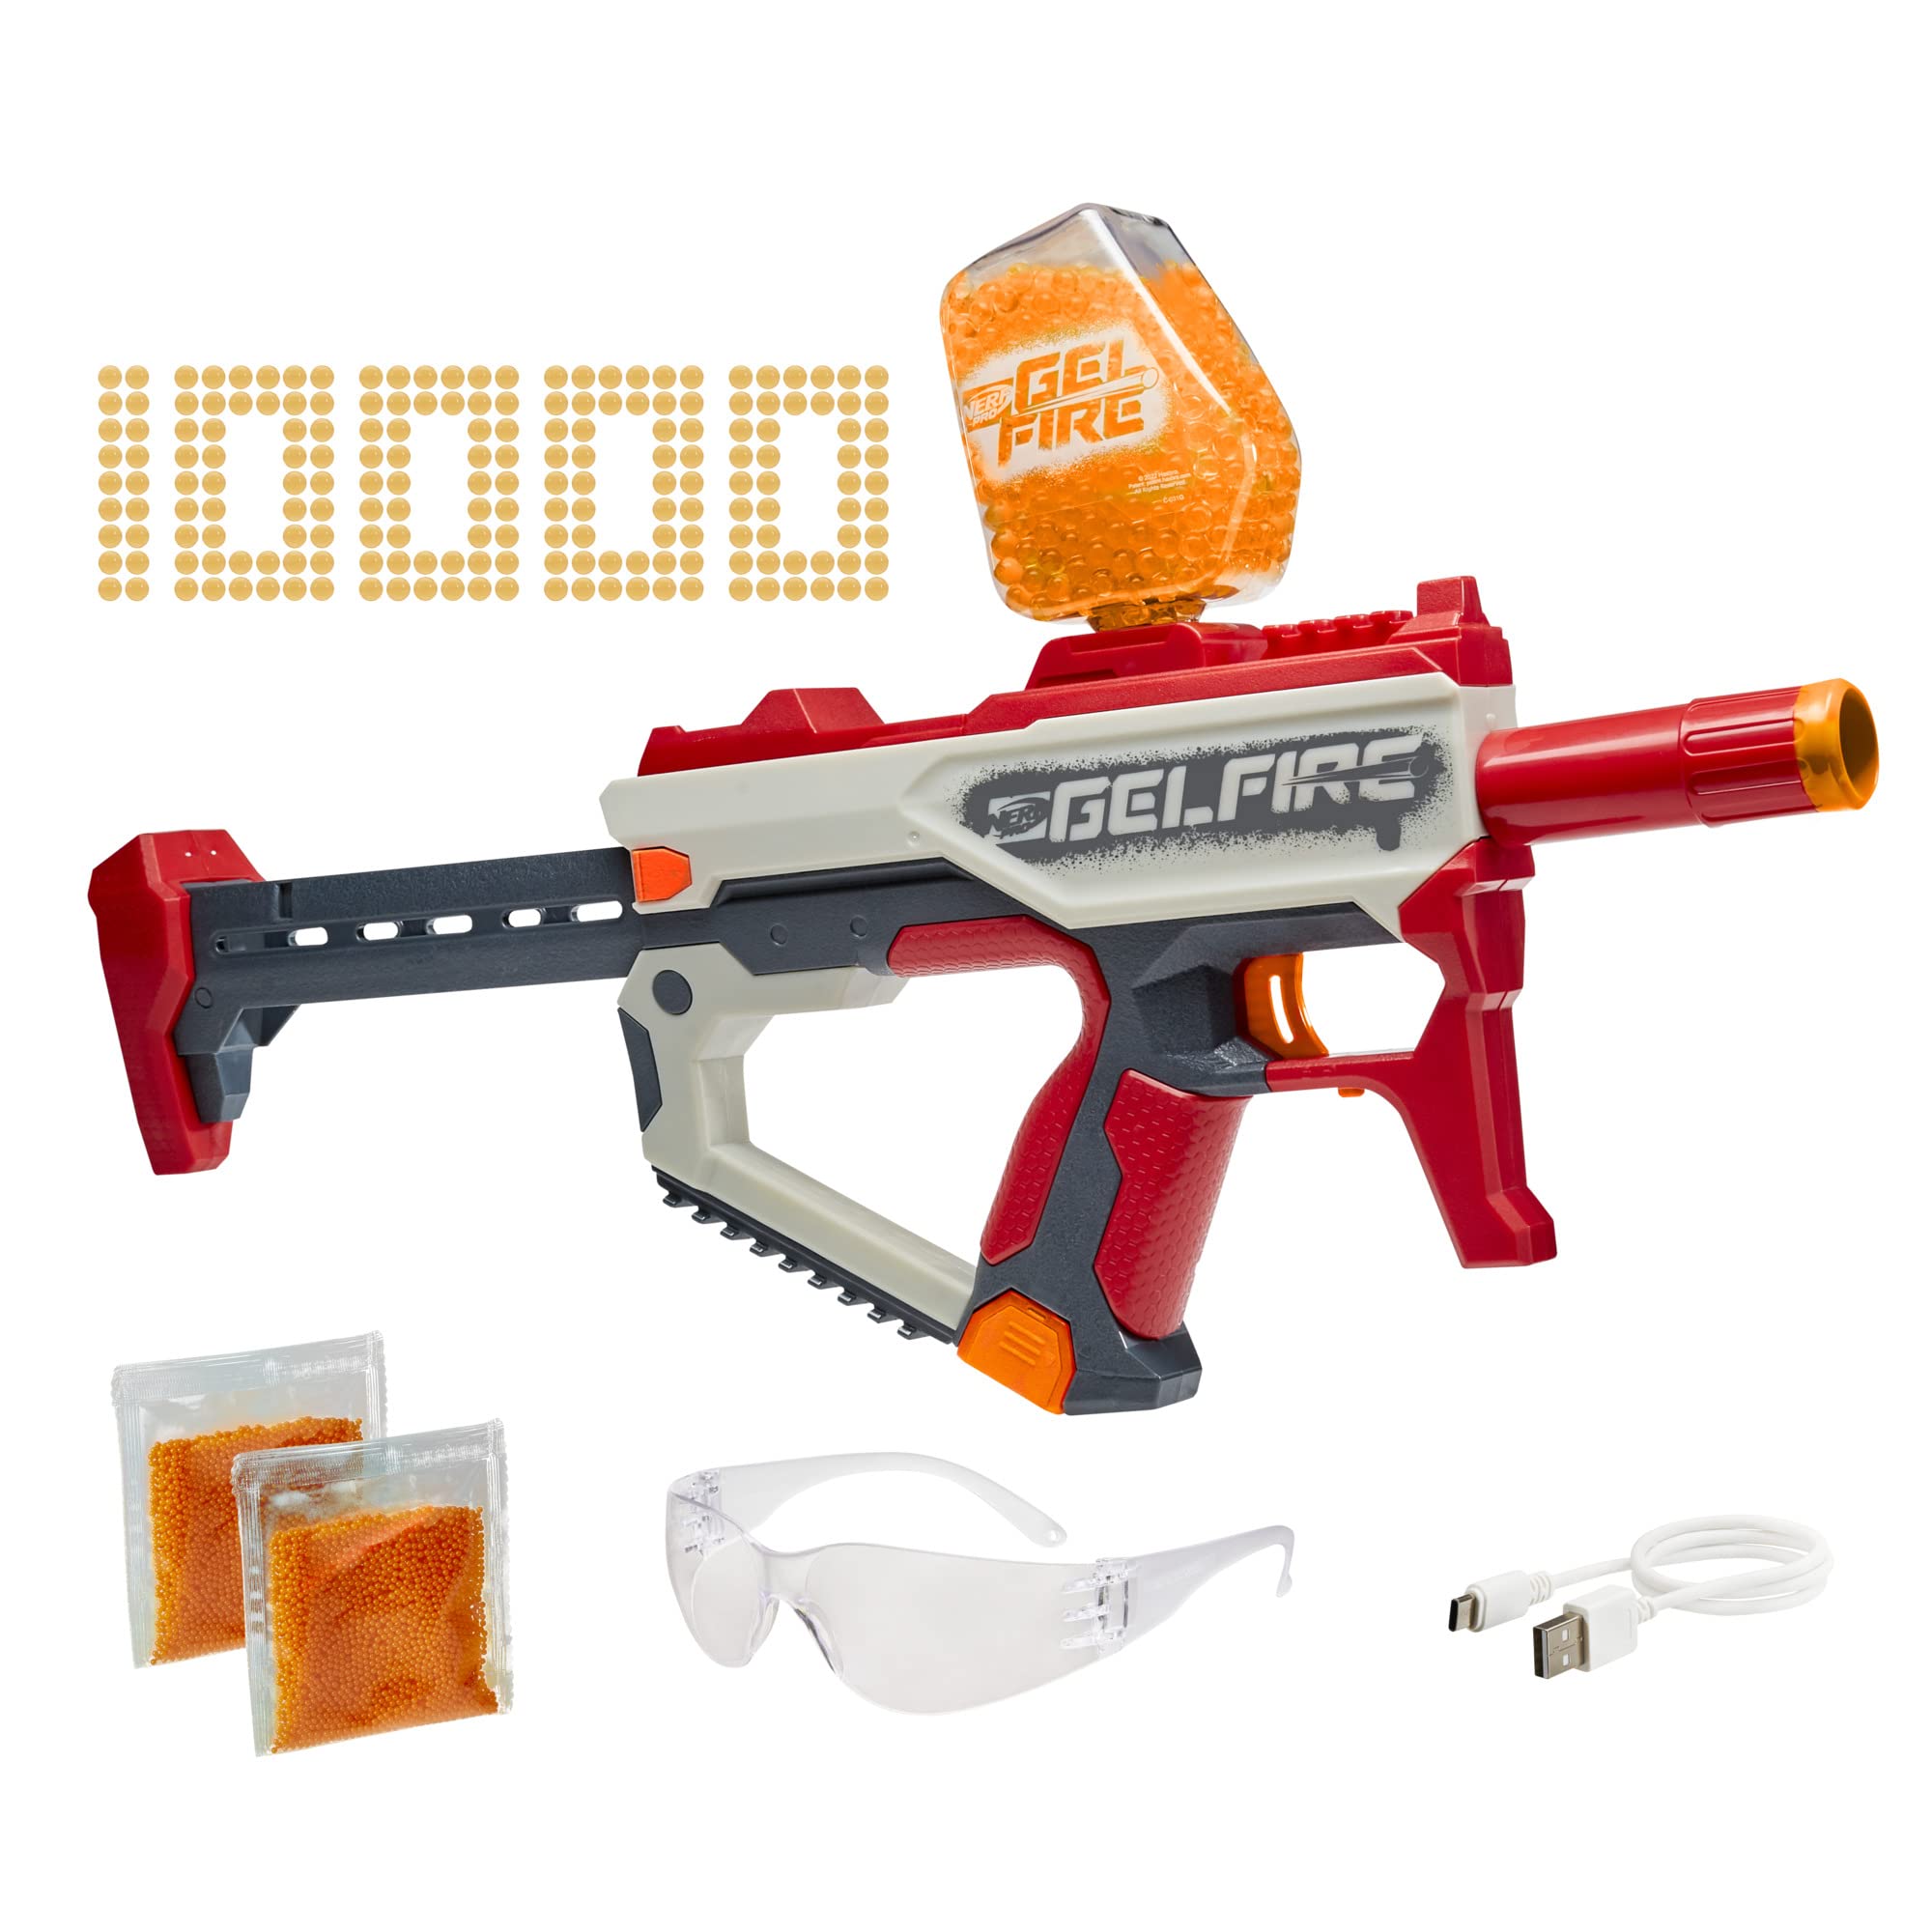 Nerf Pro Gelfire Mythic Full Auto Gel Blaster & 10,000 Gelfire Rounds, 800 Round Hopper, Rechargeable Battery, Eyewear, Ages 14 & Up $32 + Free Shipping